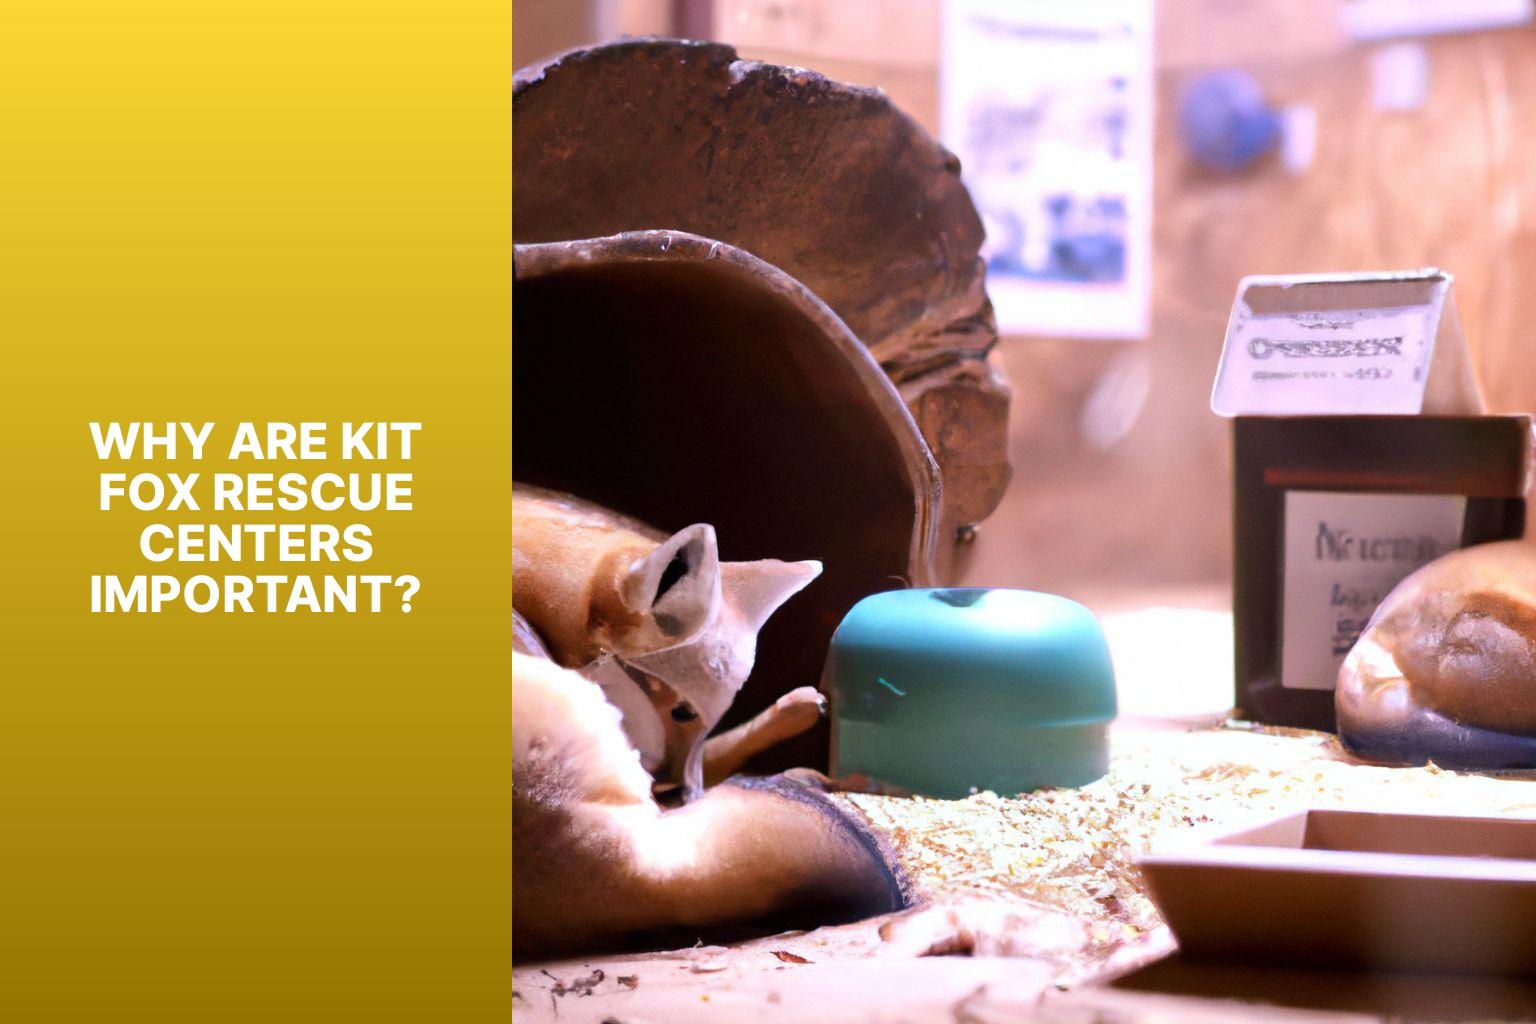 Why are Kit Fox Rescue Centers Important? - Kit Fox Rescue Centers 